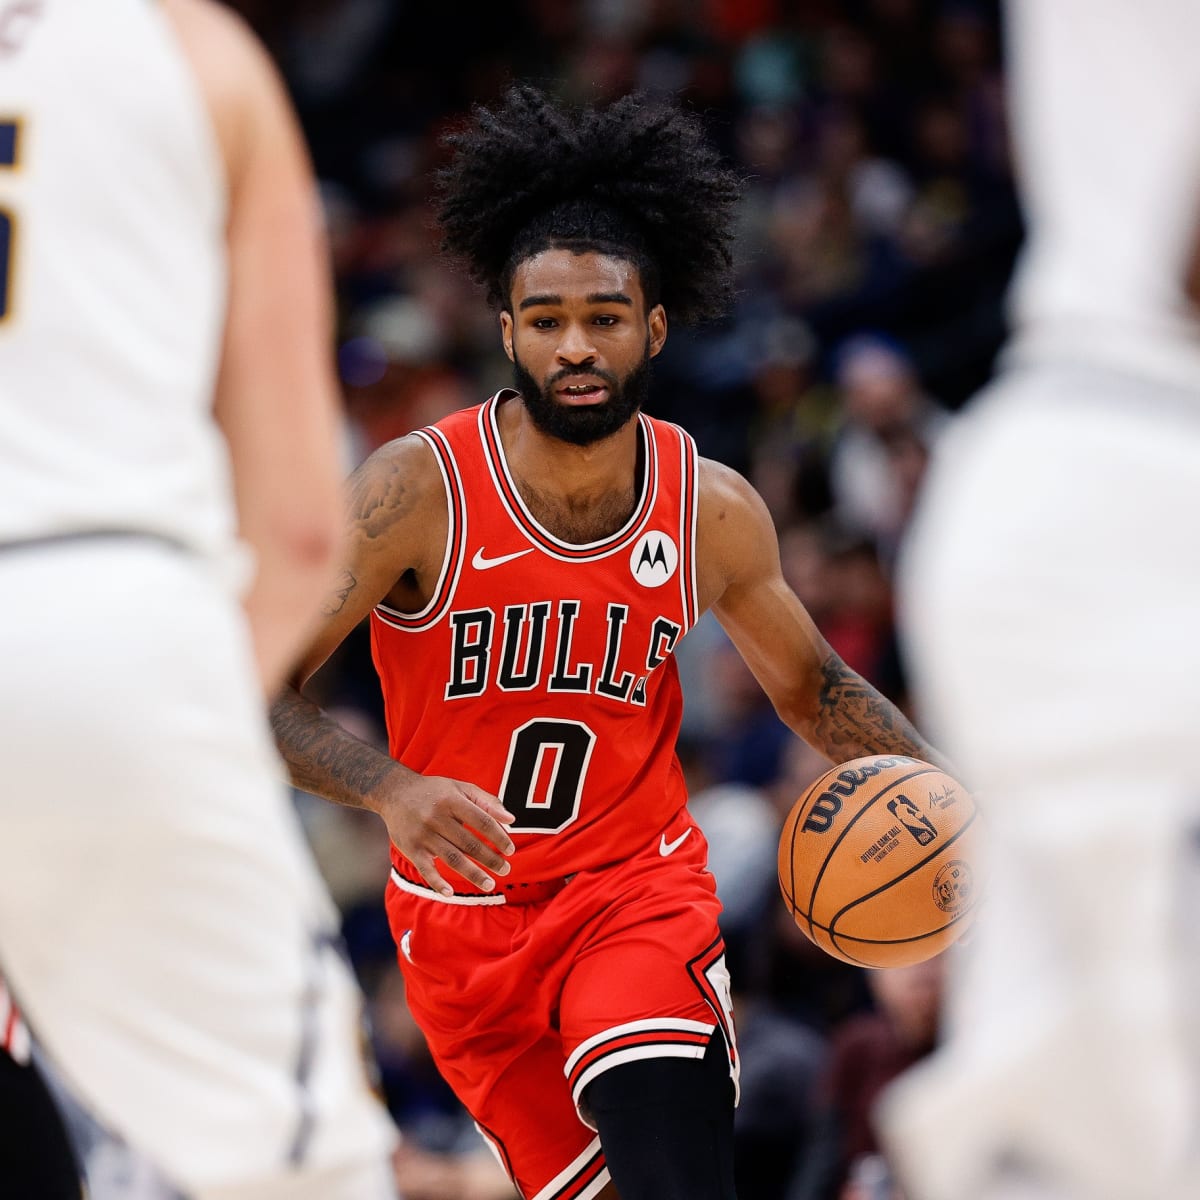 New Bulls point guard Coby White is built for buckets 